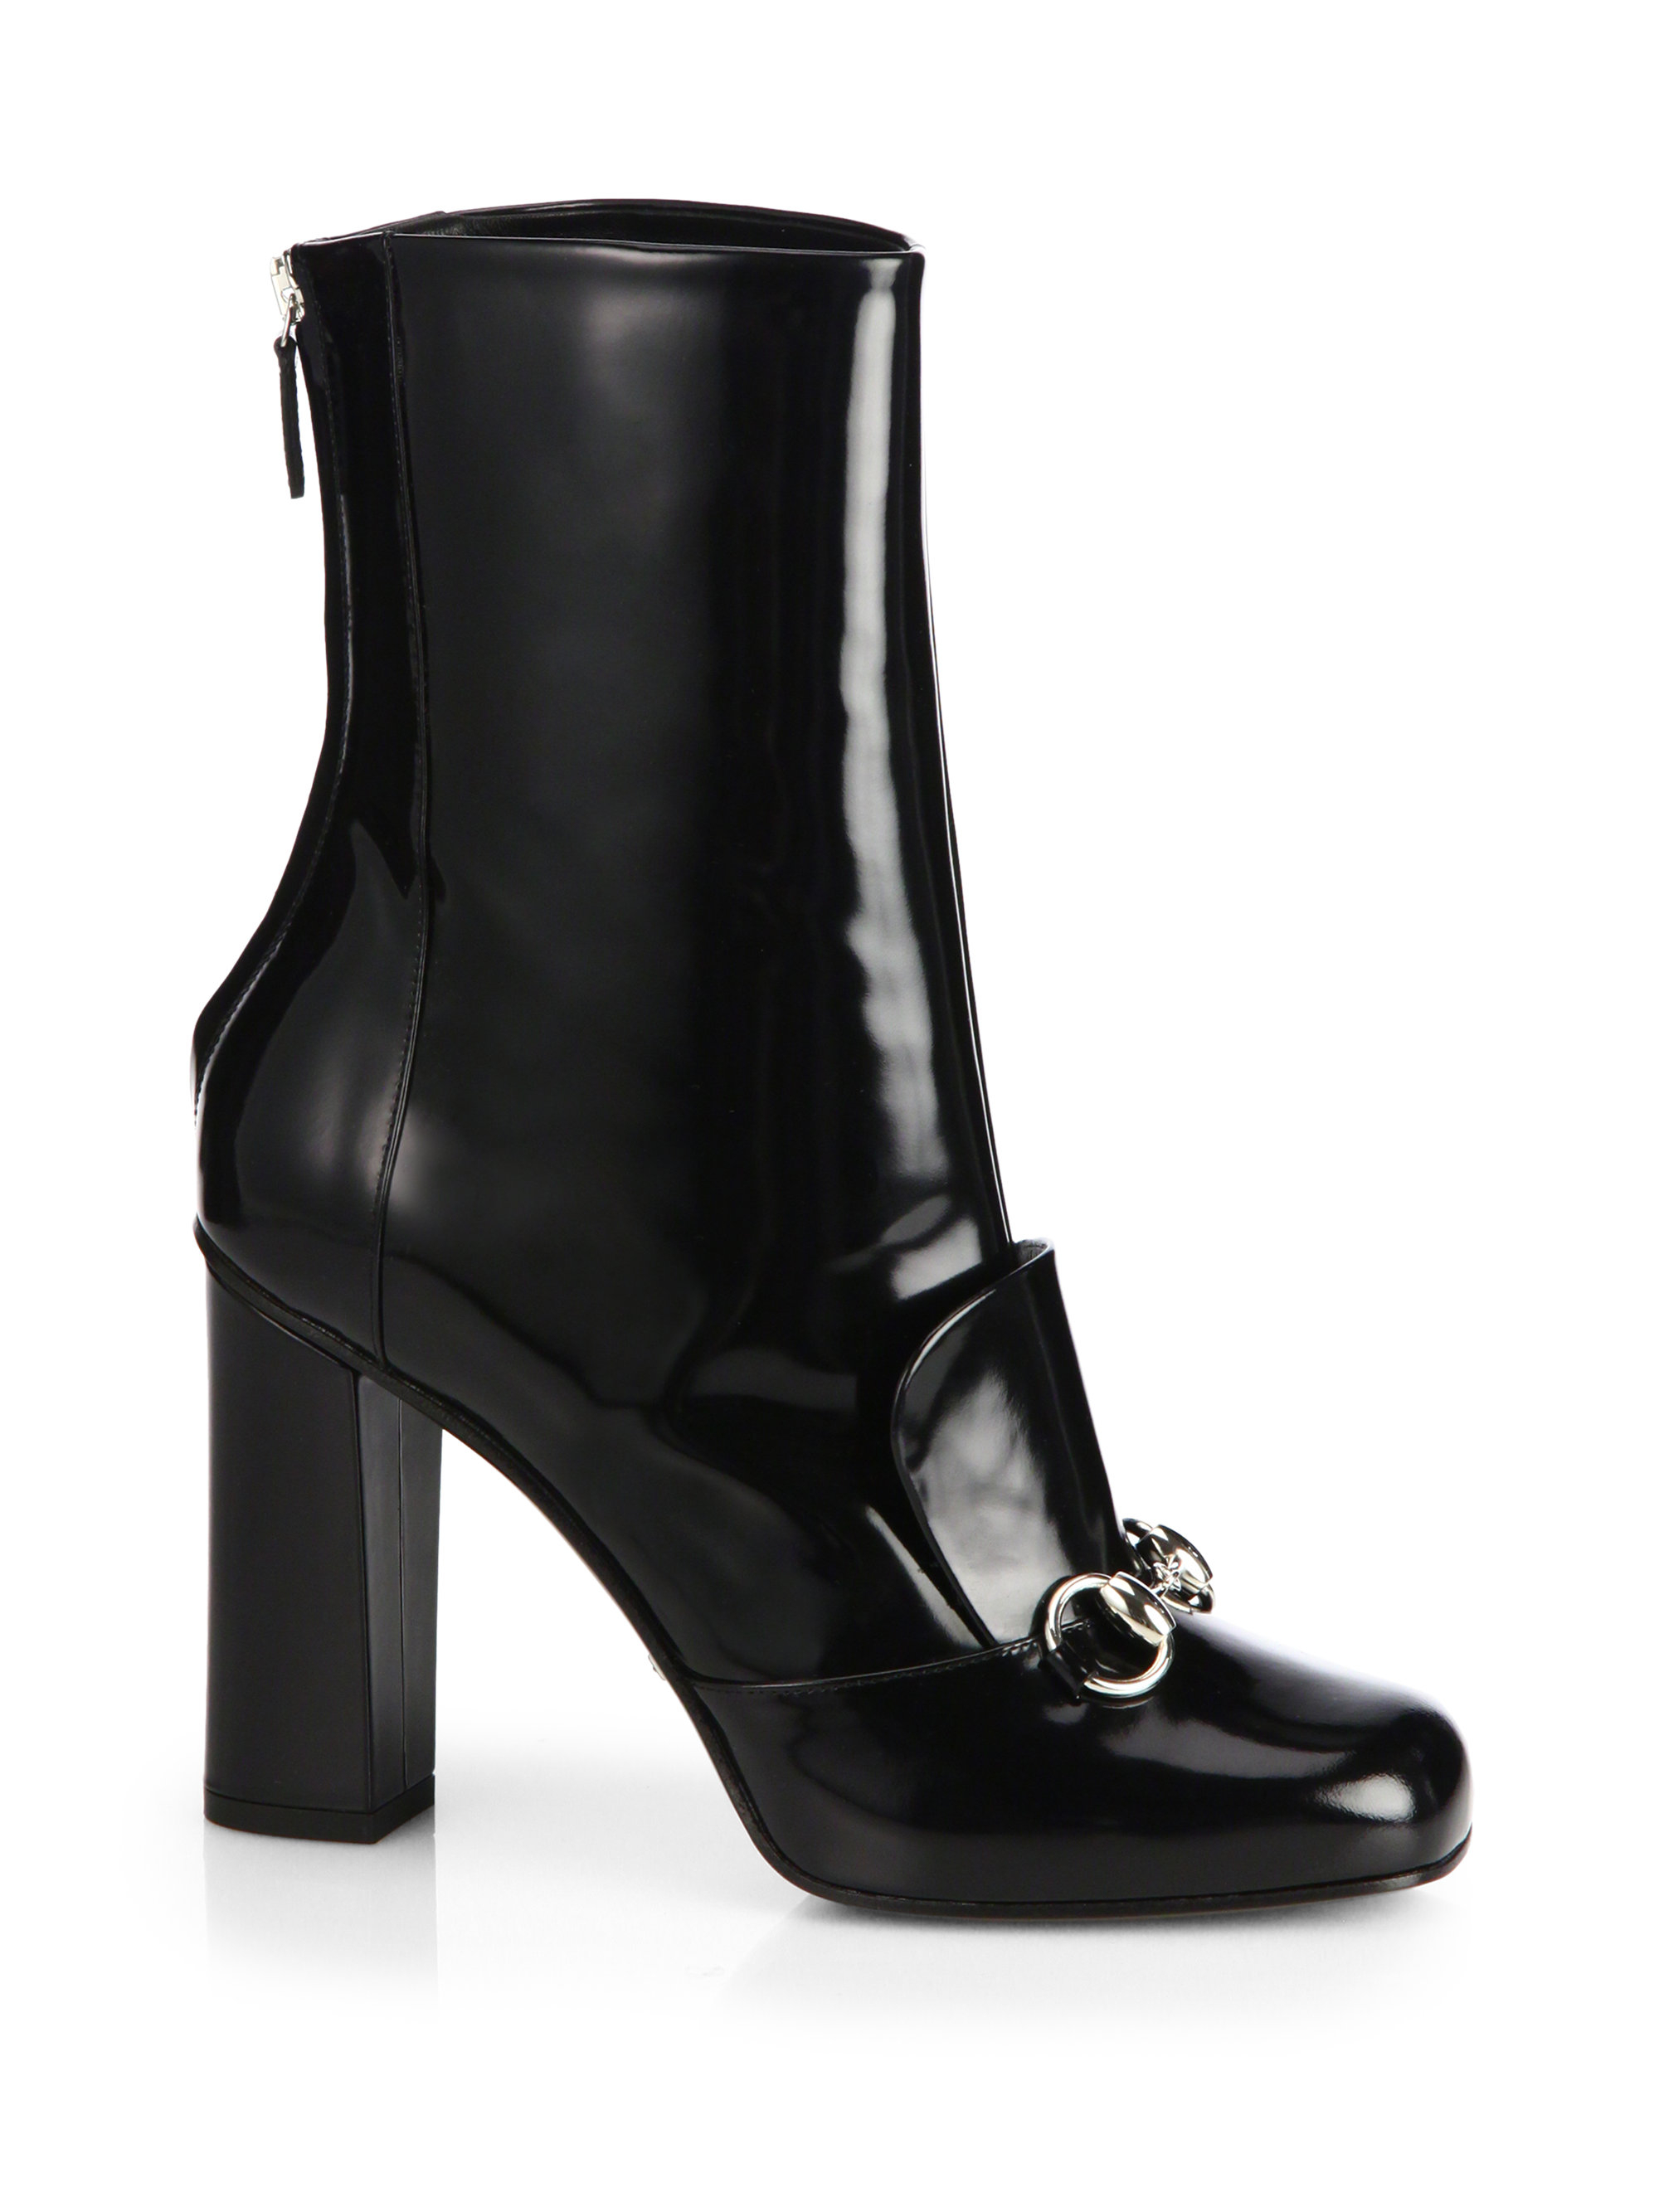 Lyst - Gucci Lilian Patent-Leather Horsebit Ankle Boots in Black